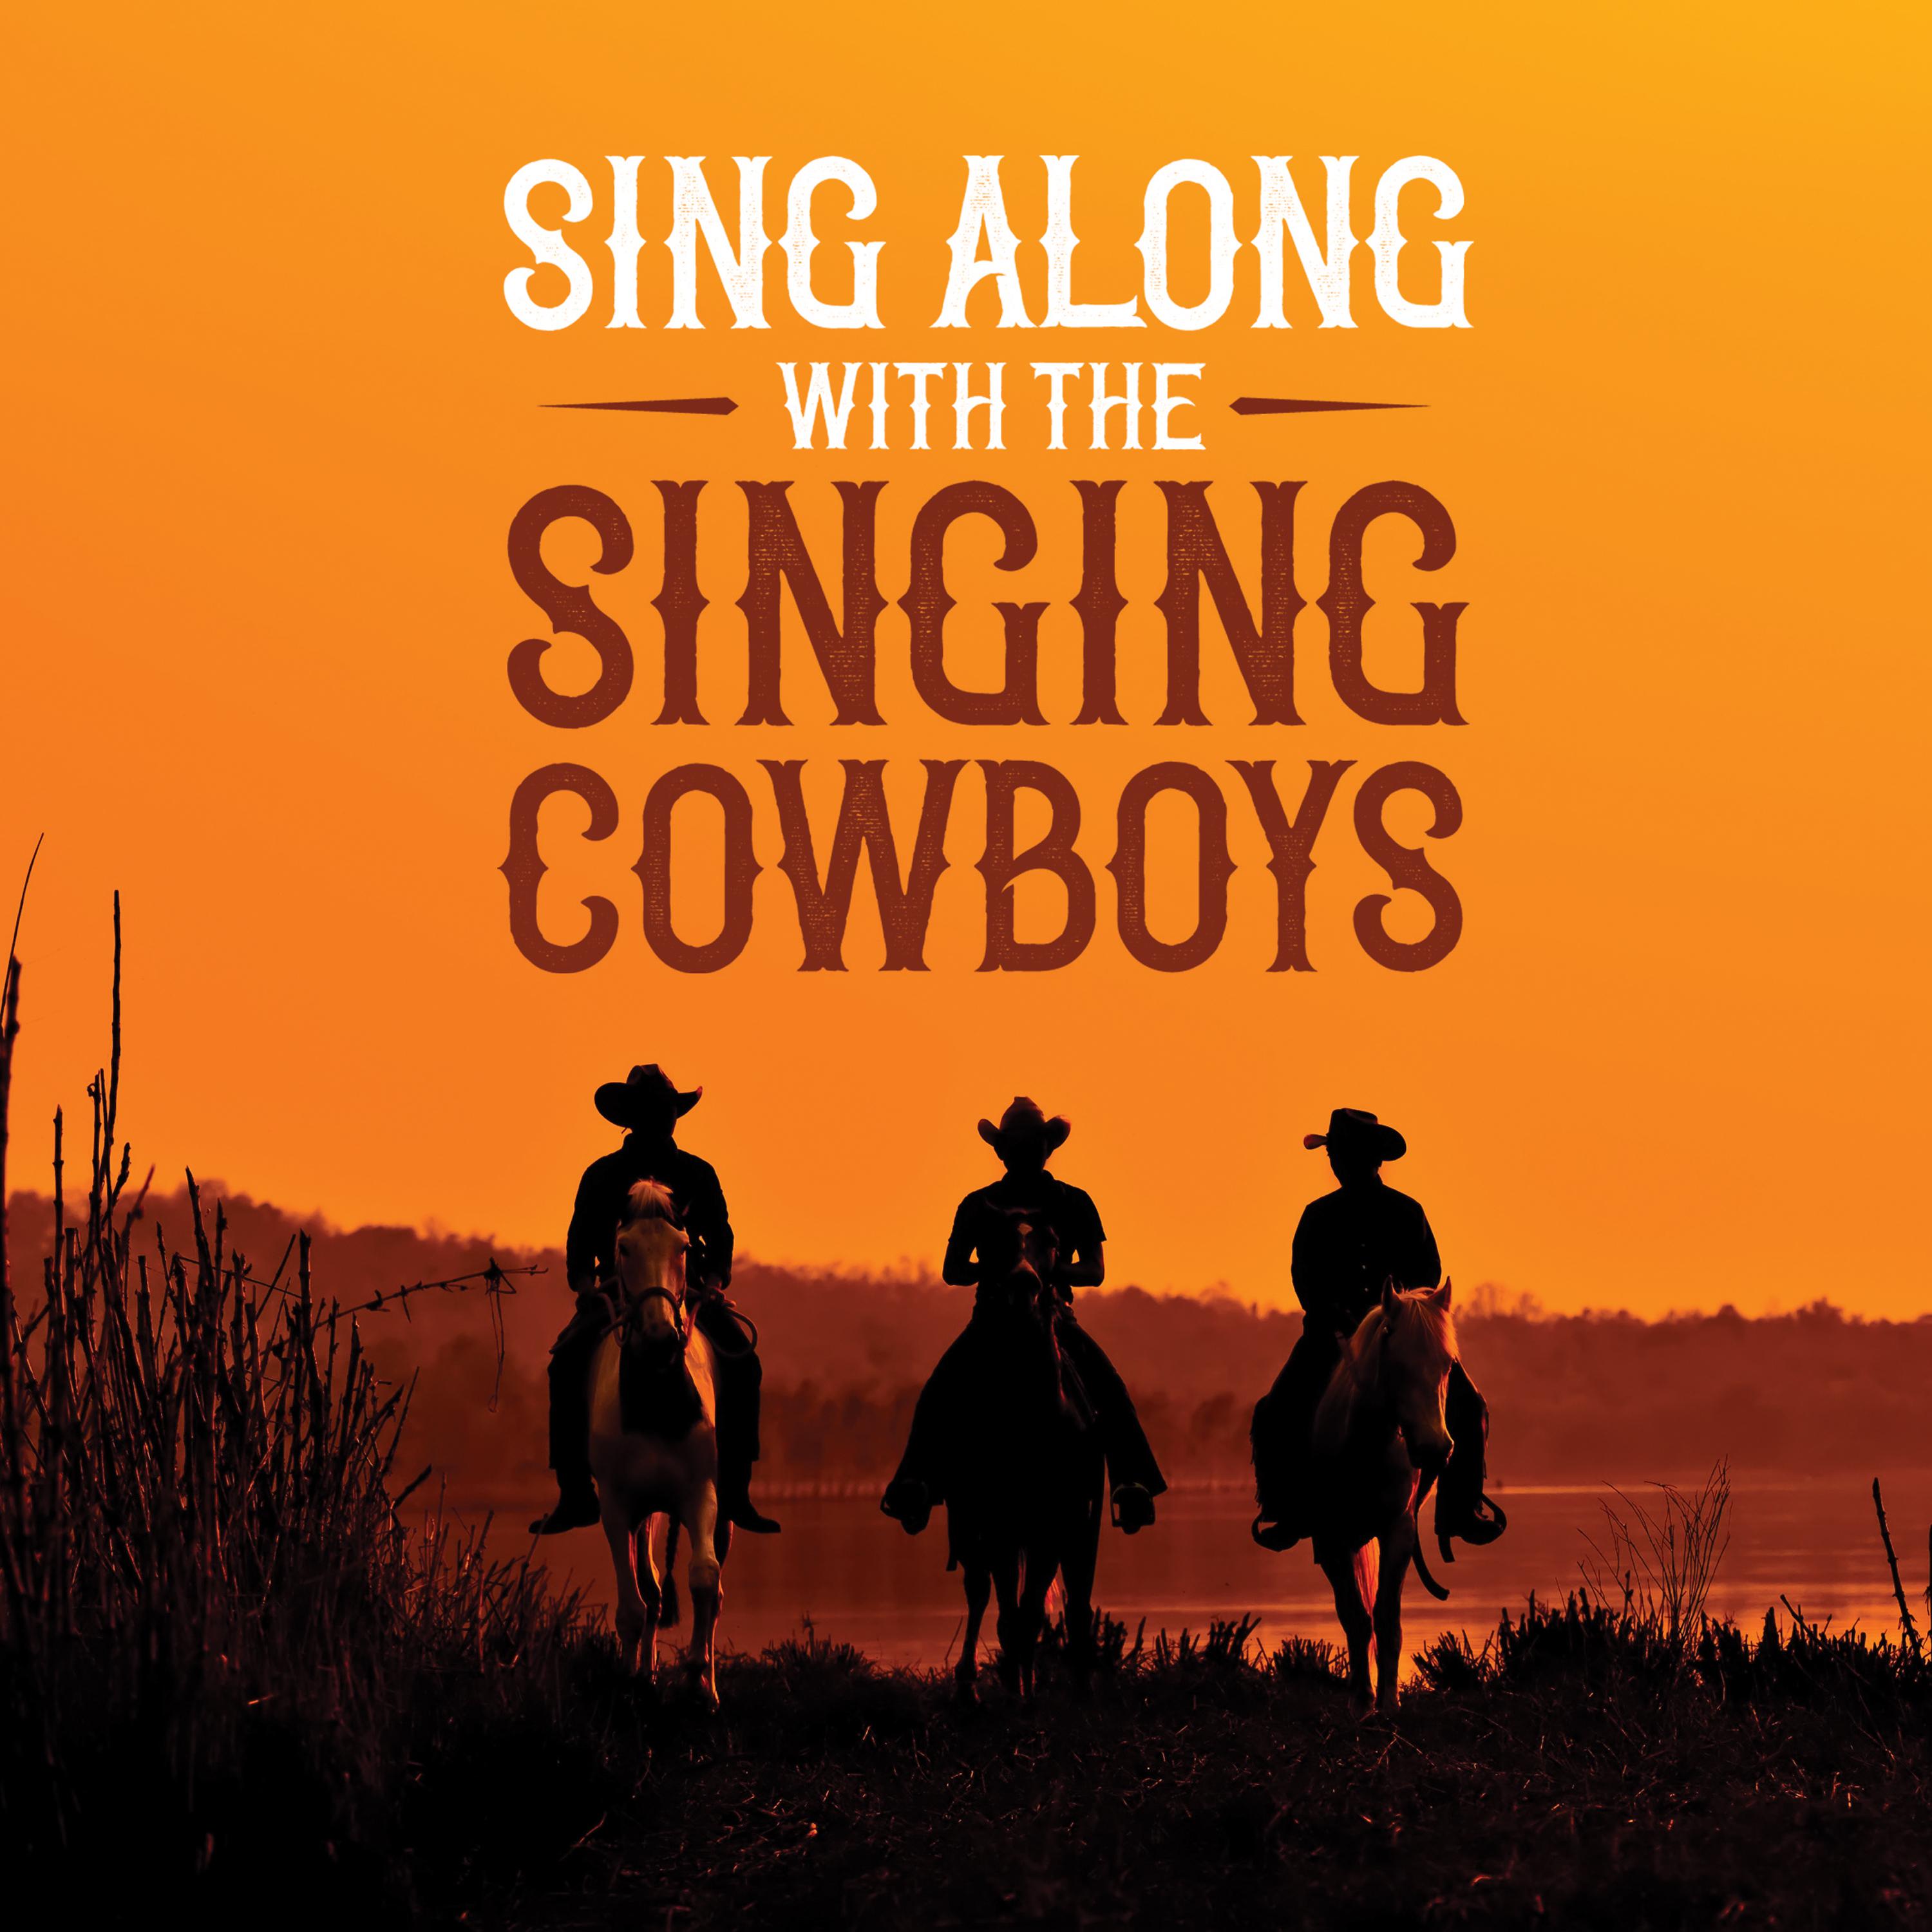 SING ALONG WITH THE SINGING COWBOYS